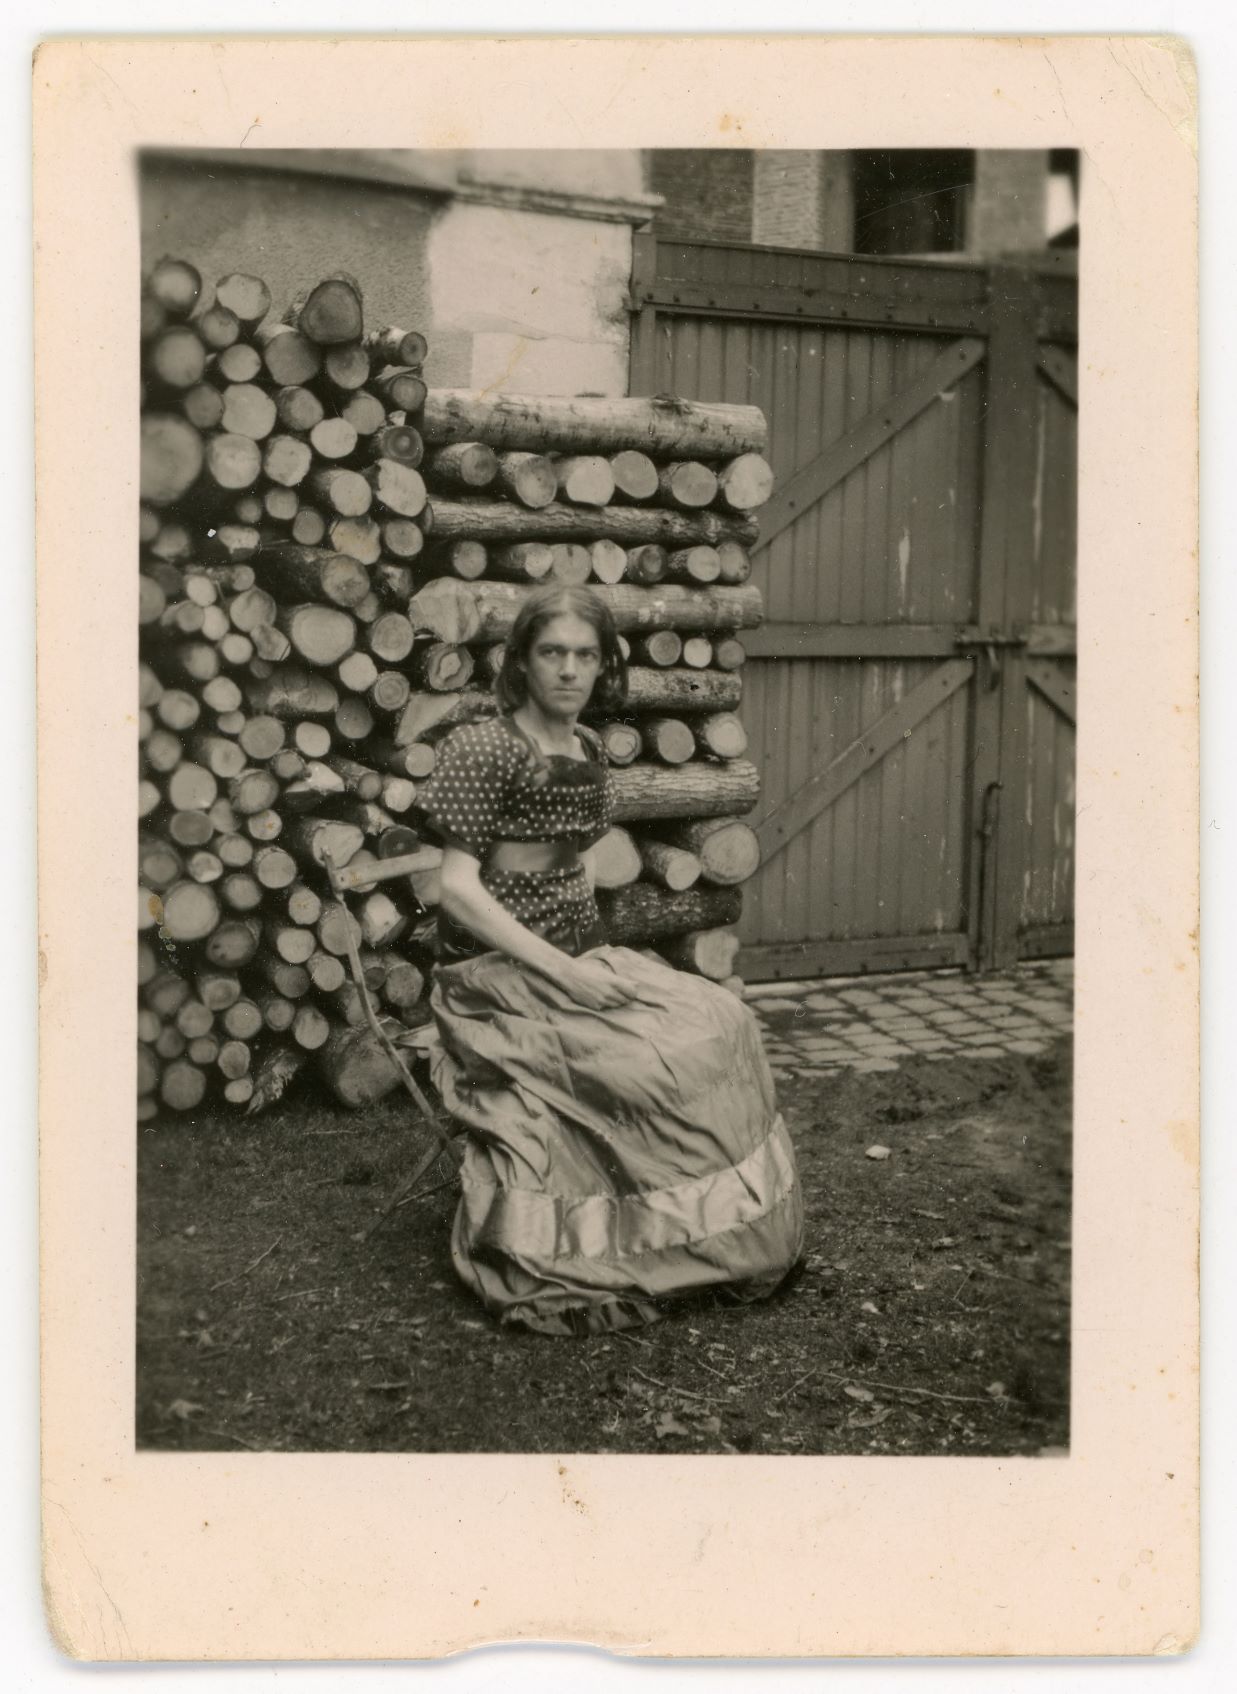 Photo presumed to have been taken in 1944 (in front of the pile of logs)